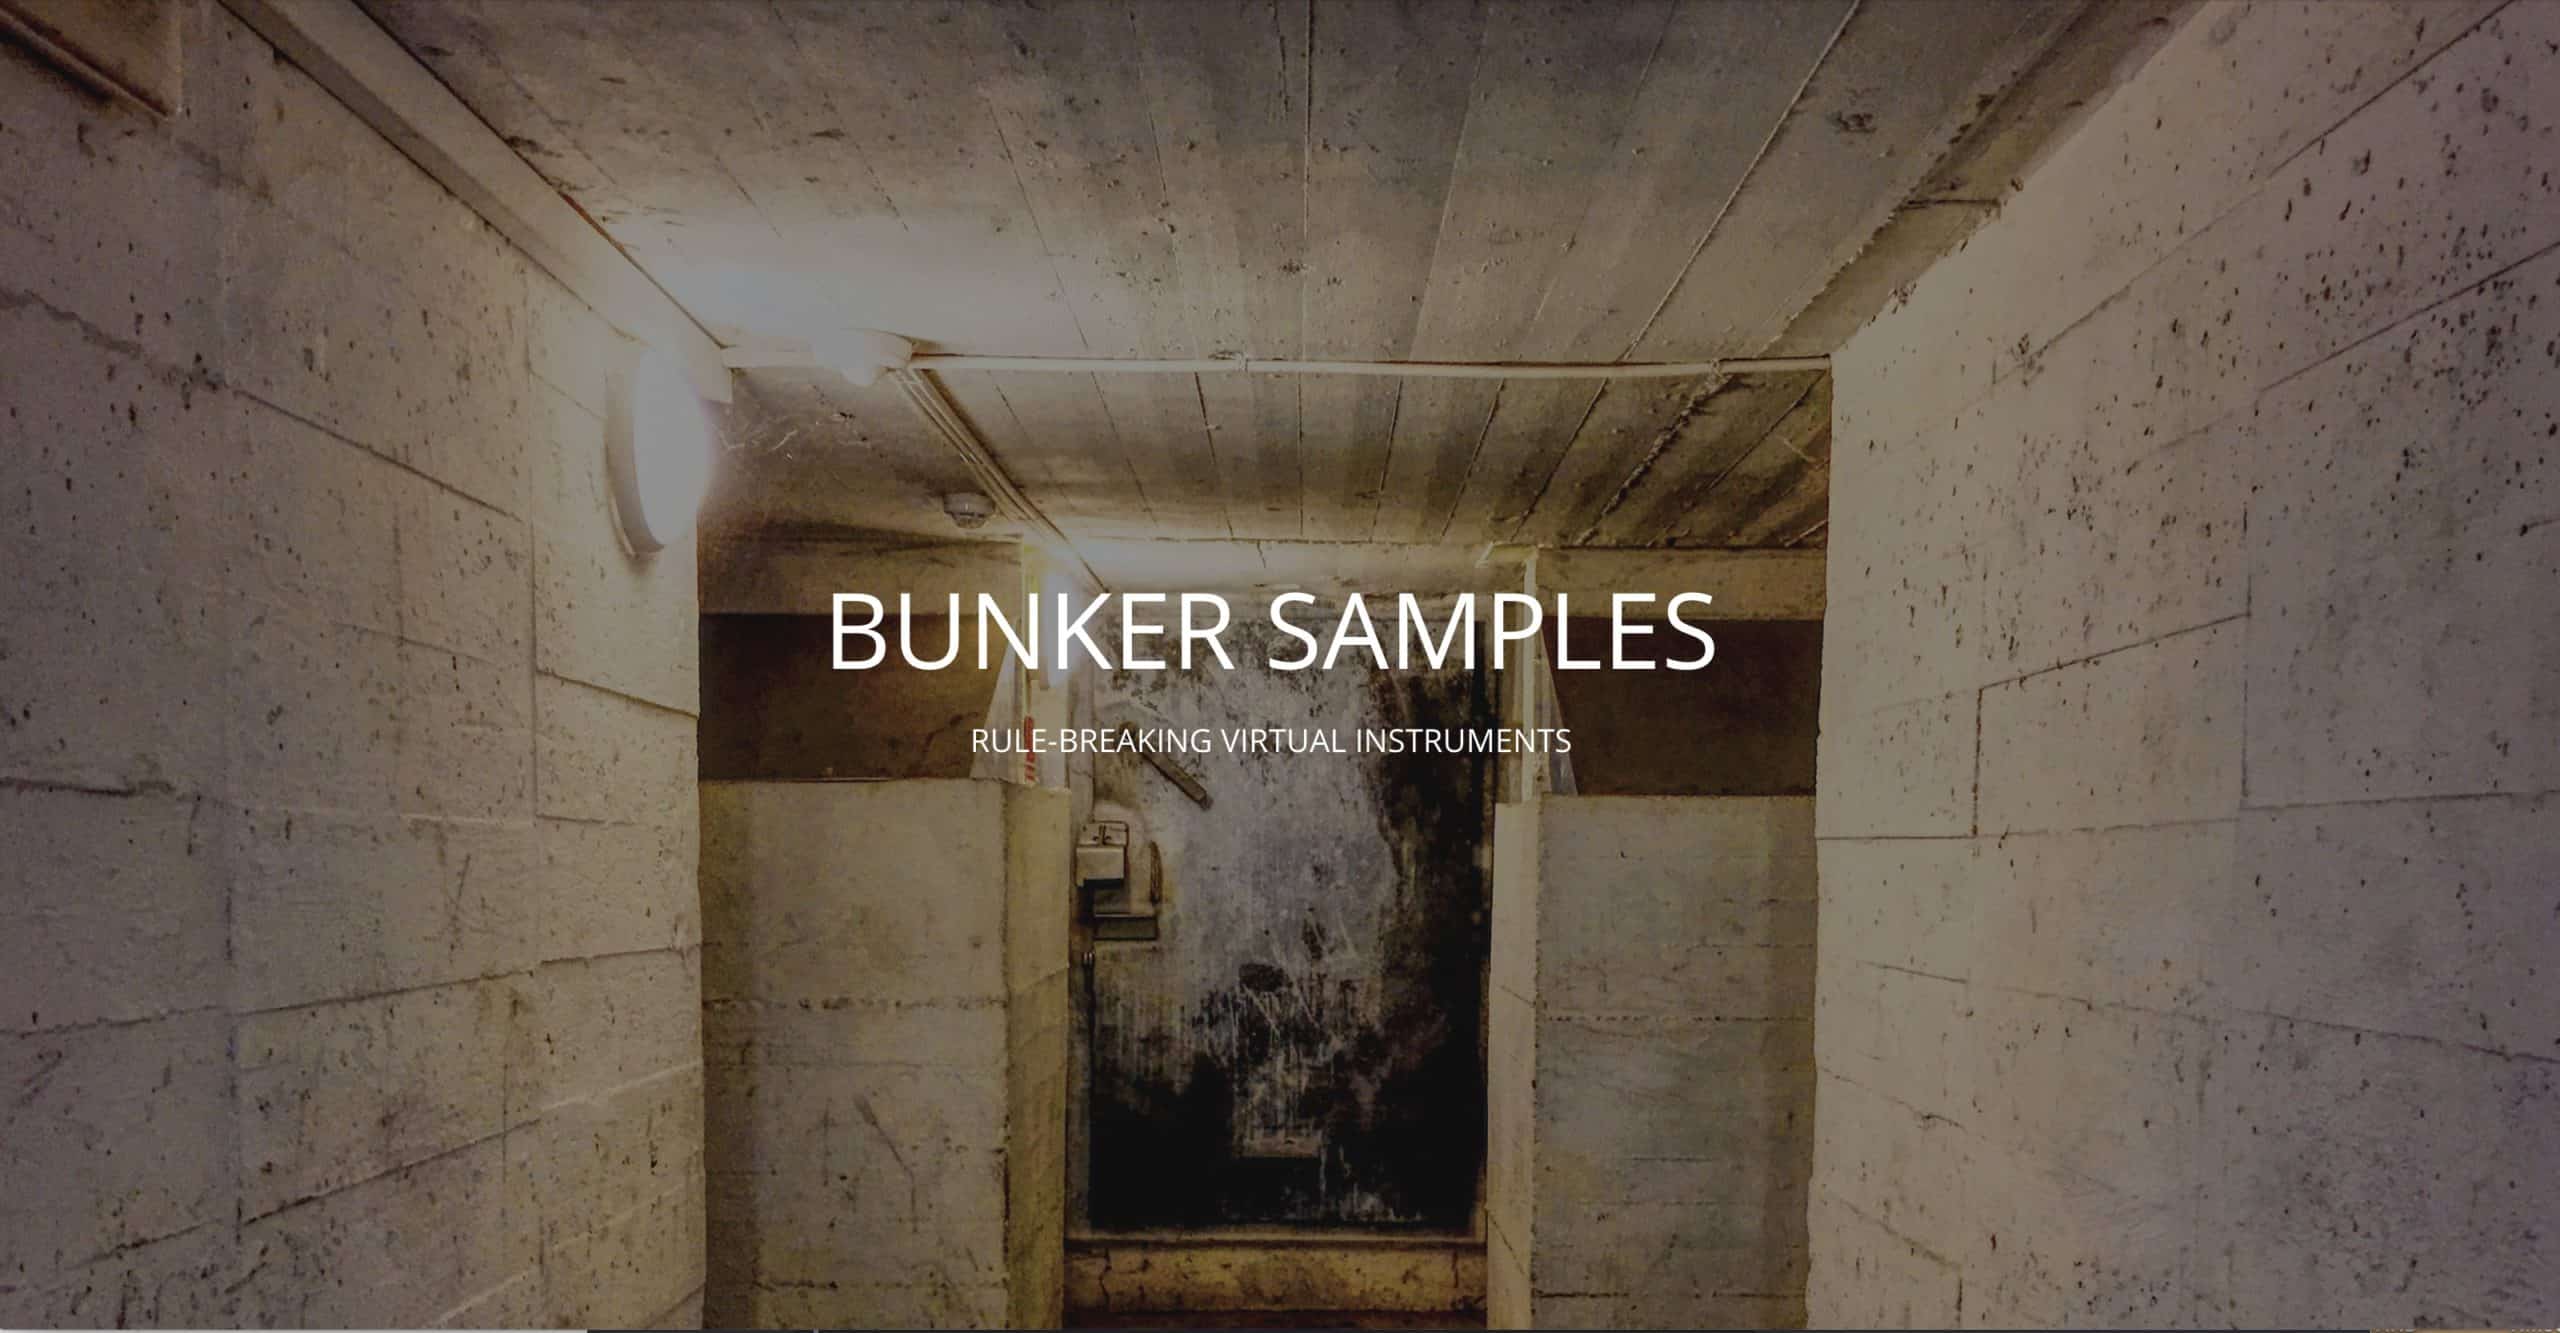 Bunker Samples launches Big temporary price drop scaled